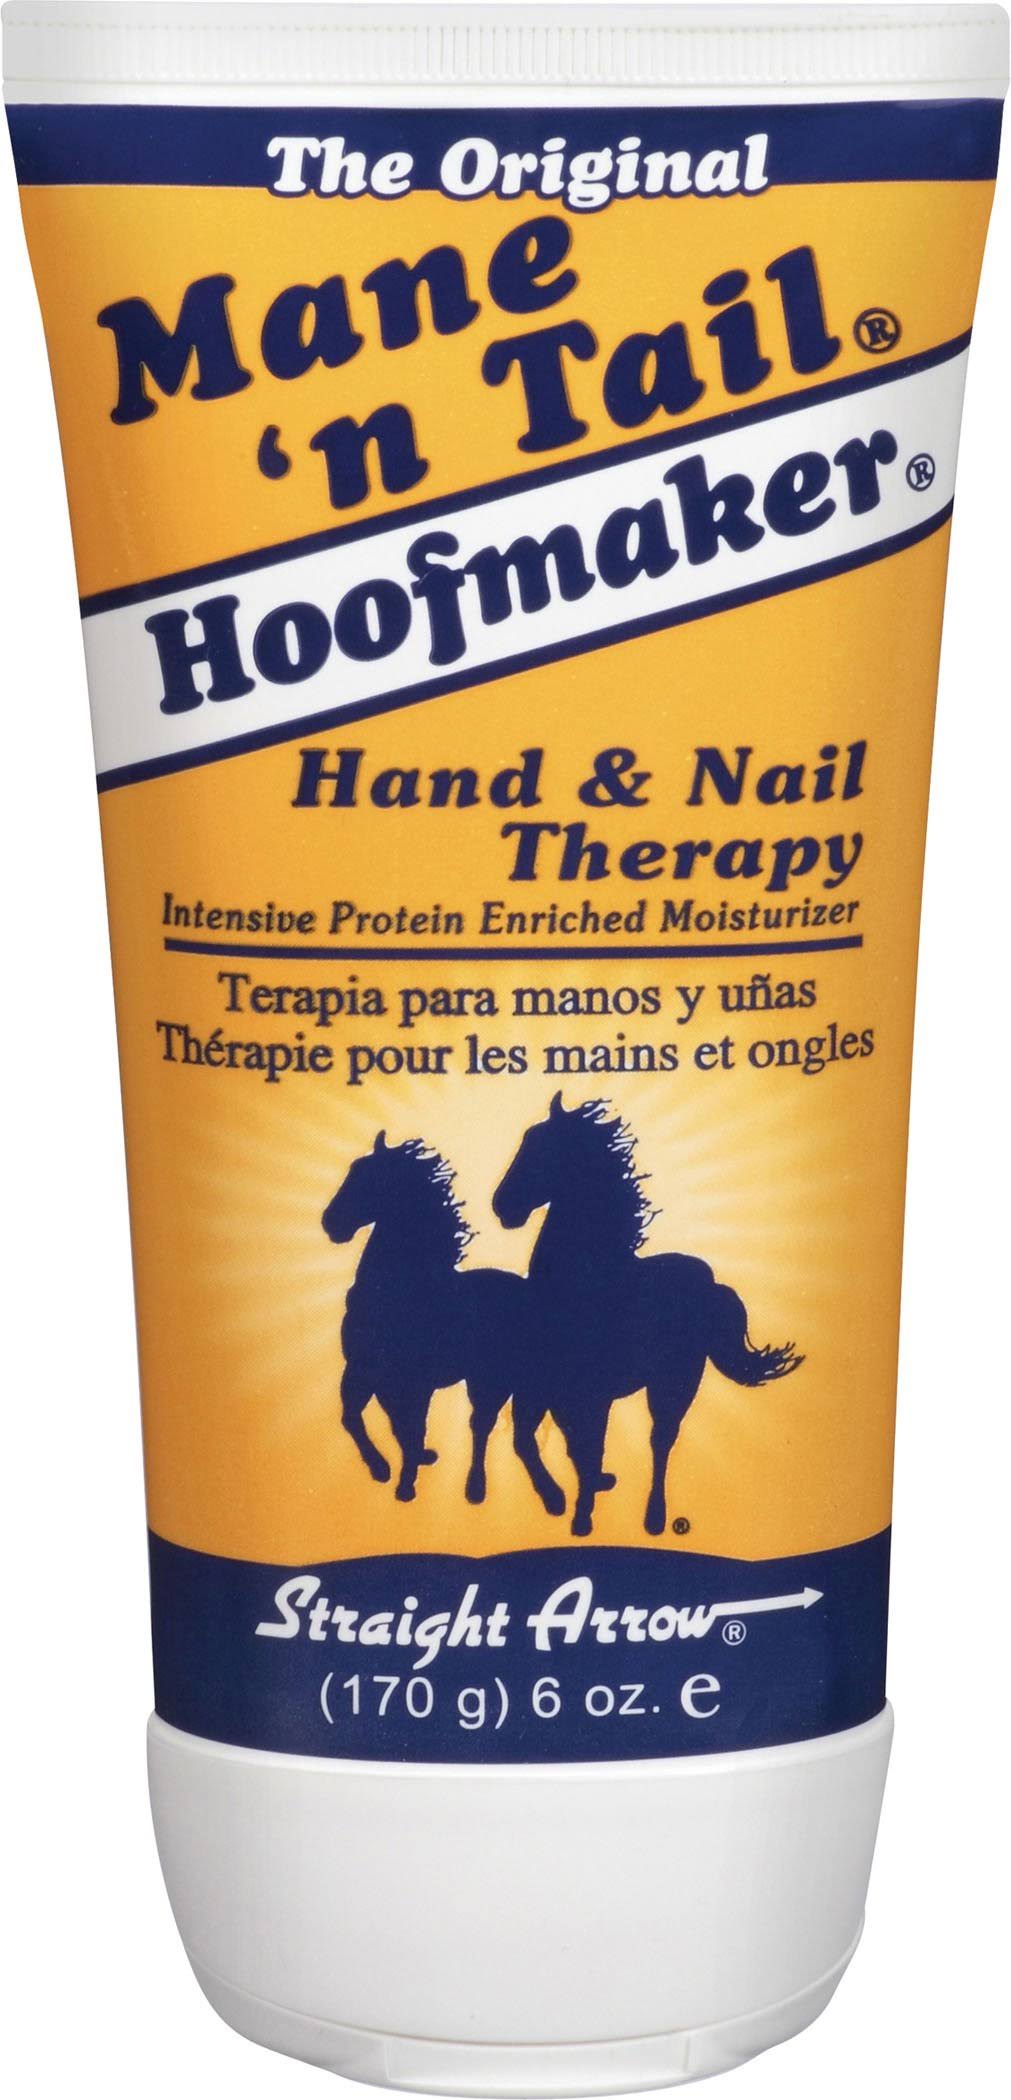 Mane 'n Tail Hoofmaker Hand & Nail Therapy - 170g